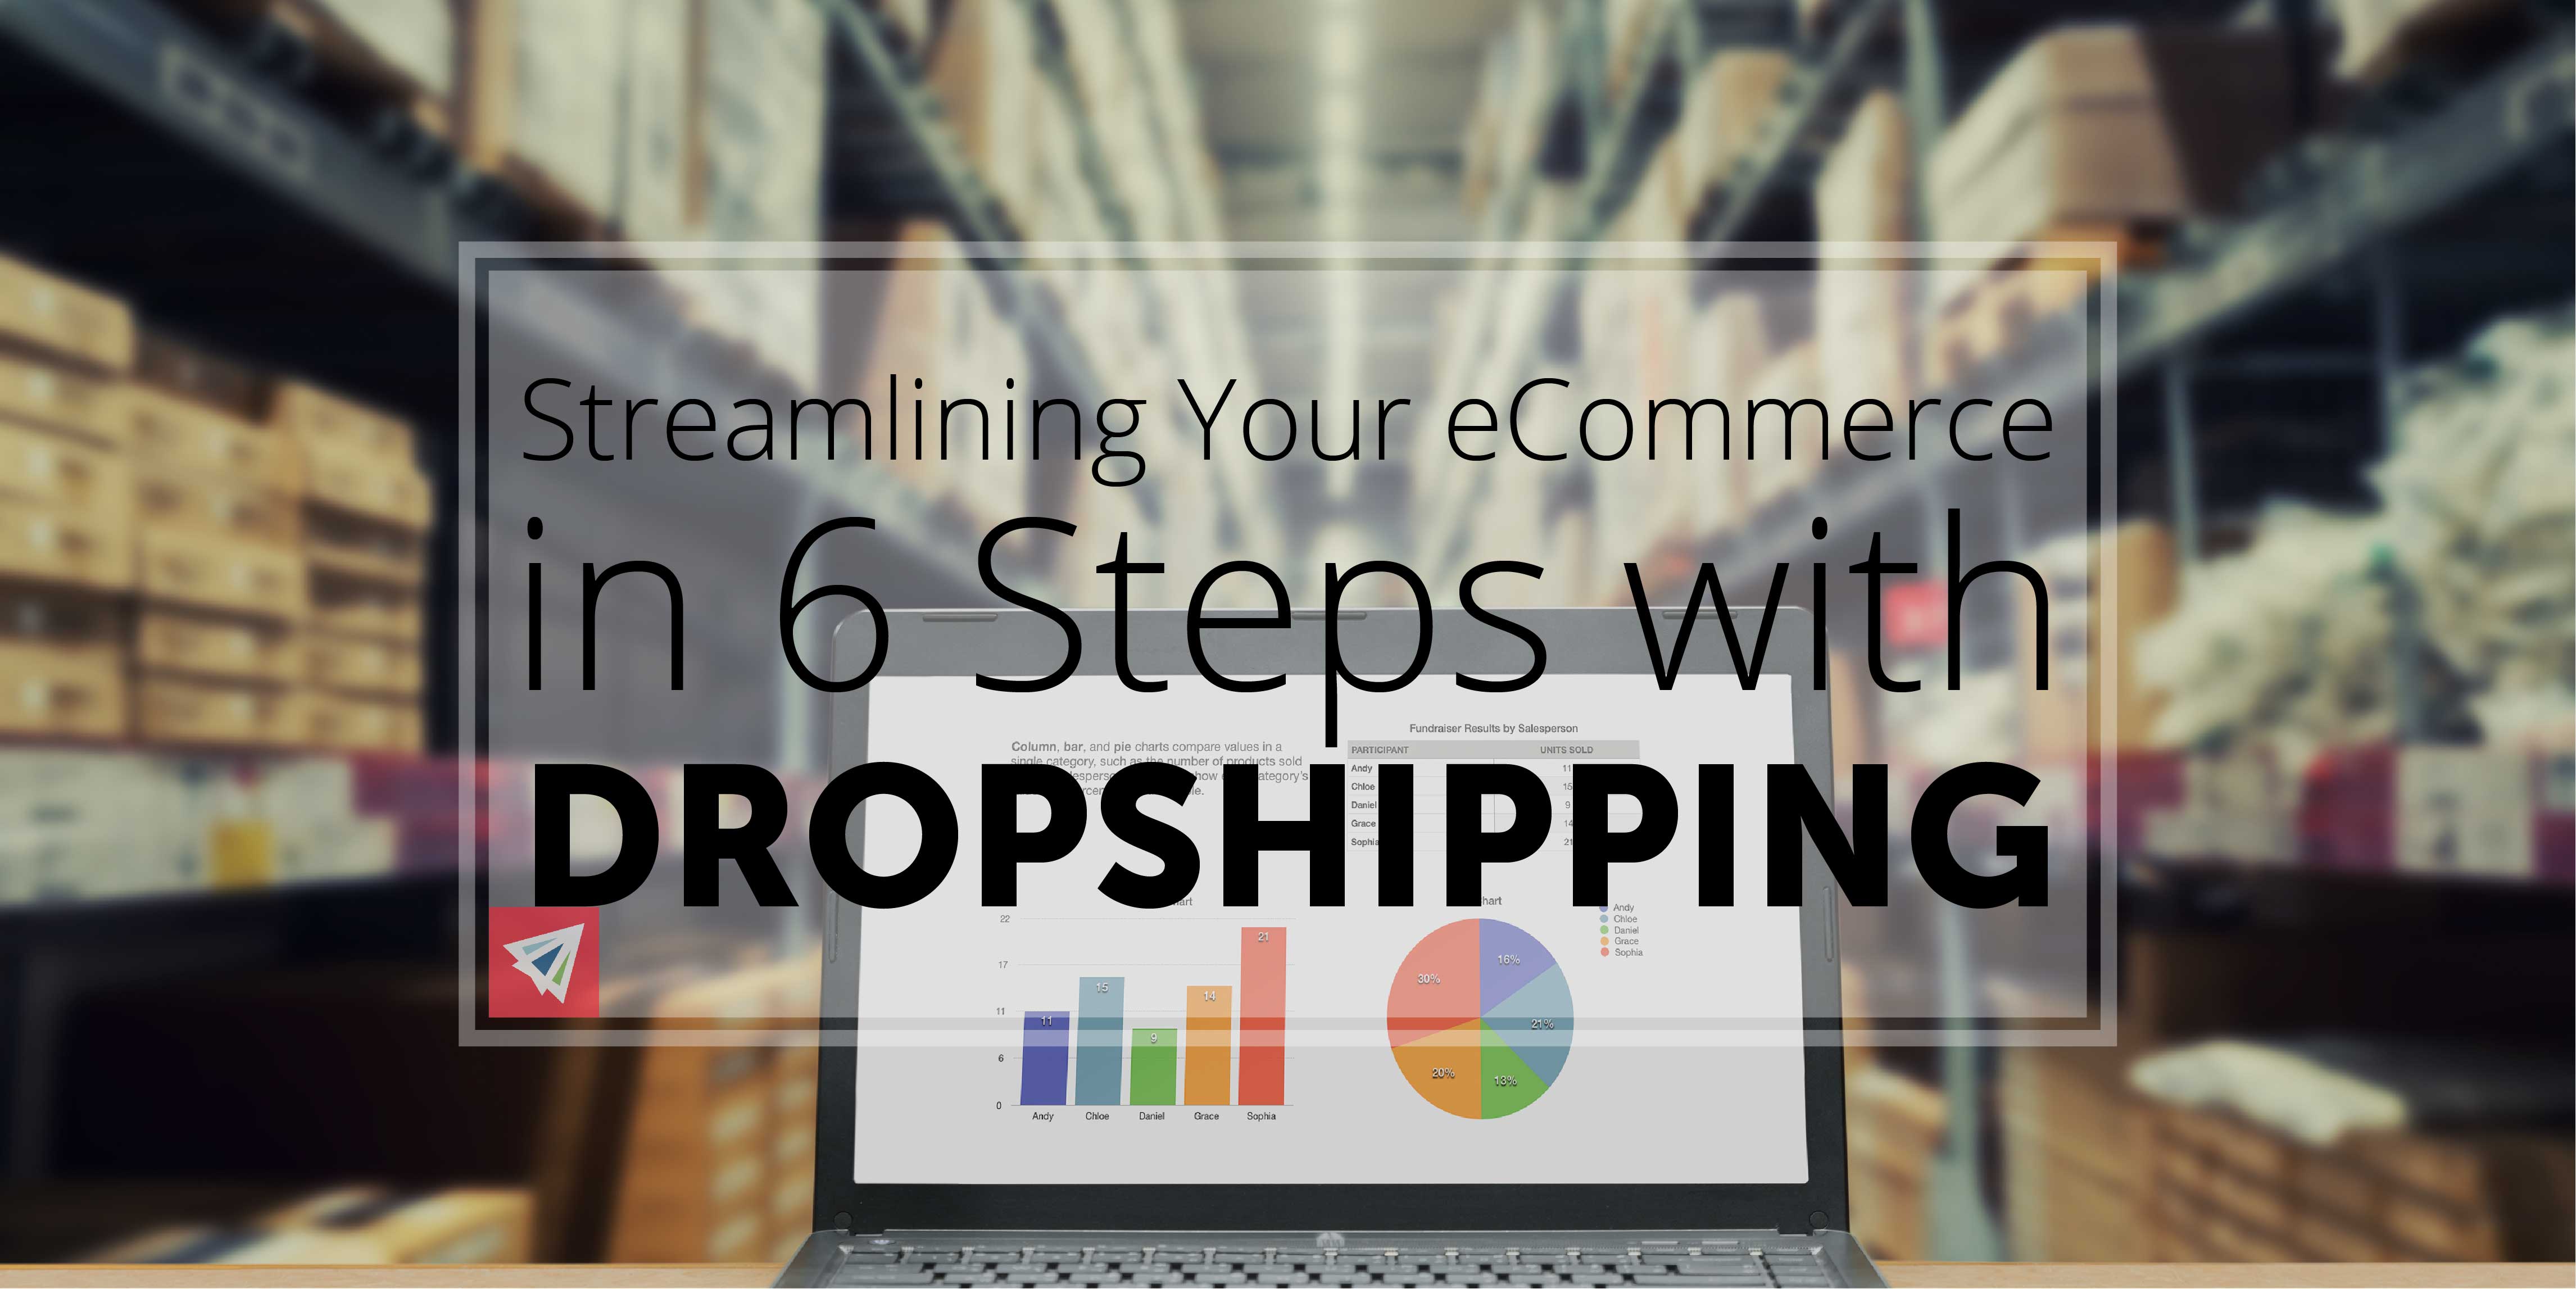 Streamlining Your eCommerce with Dropshipping in 6 Steps